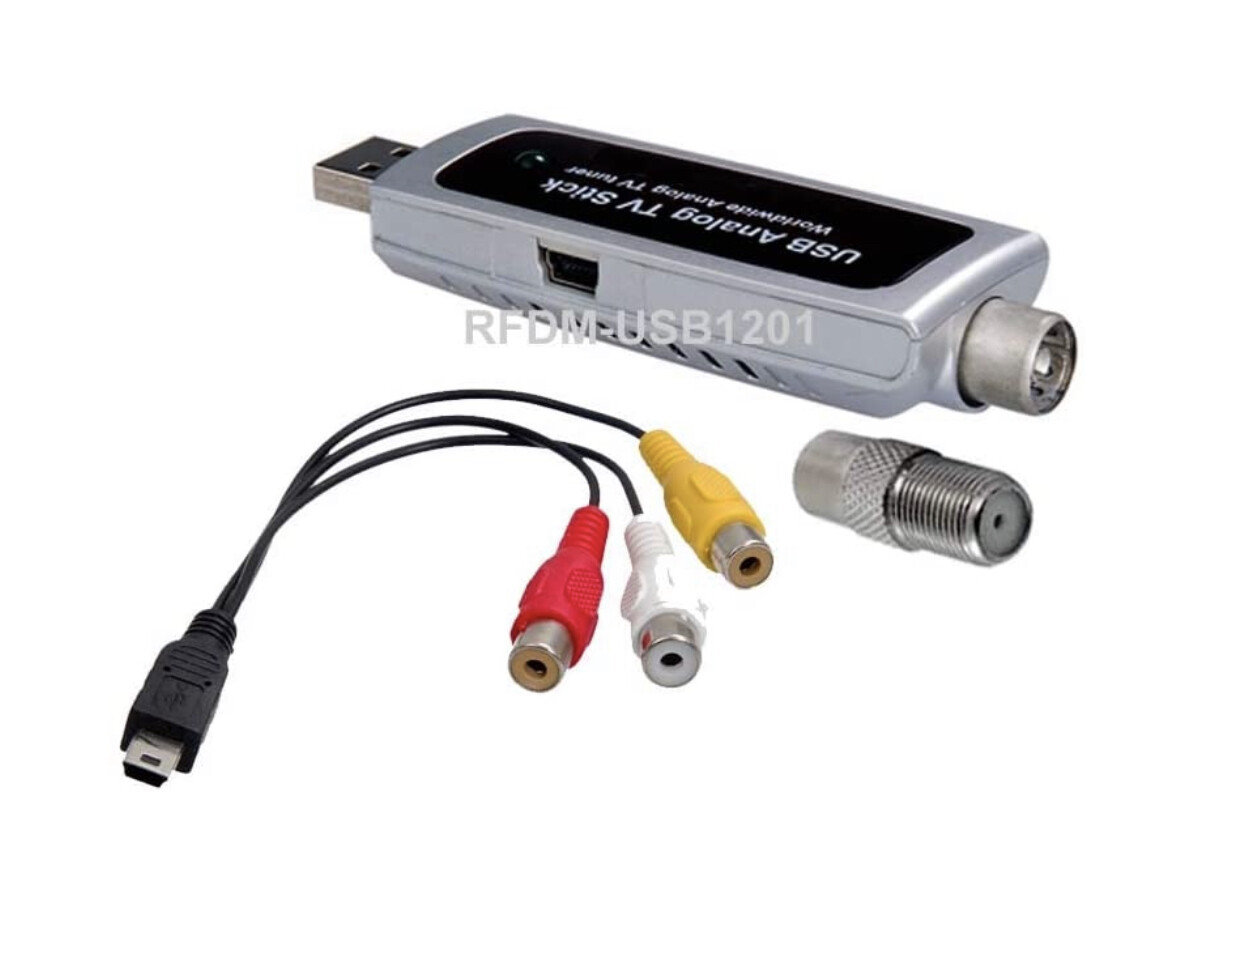 USB Analog TV Tuner with MPEG Video Capture DVR Recorder